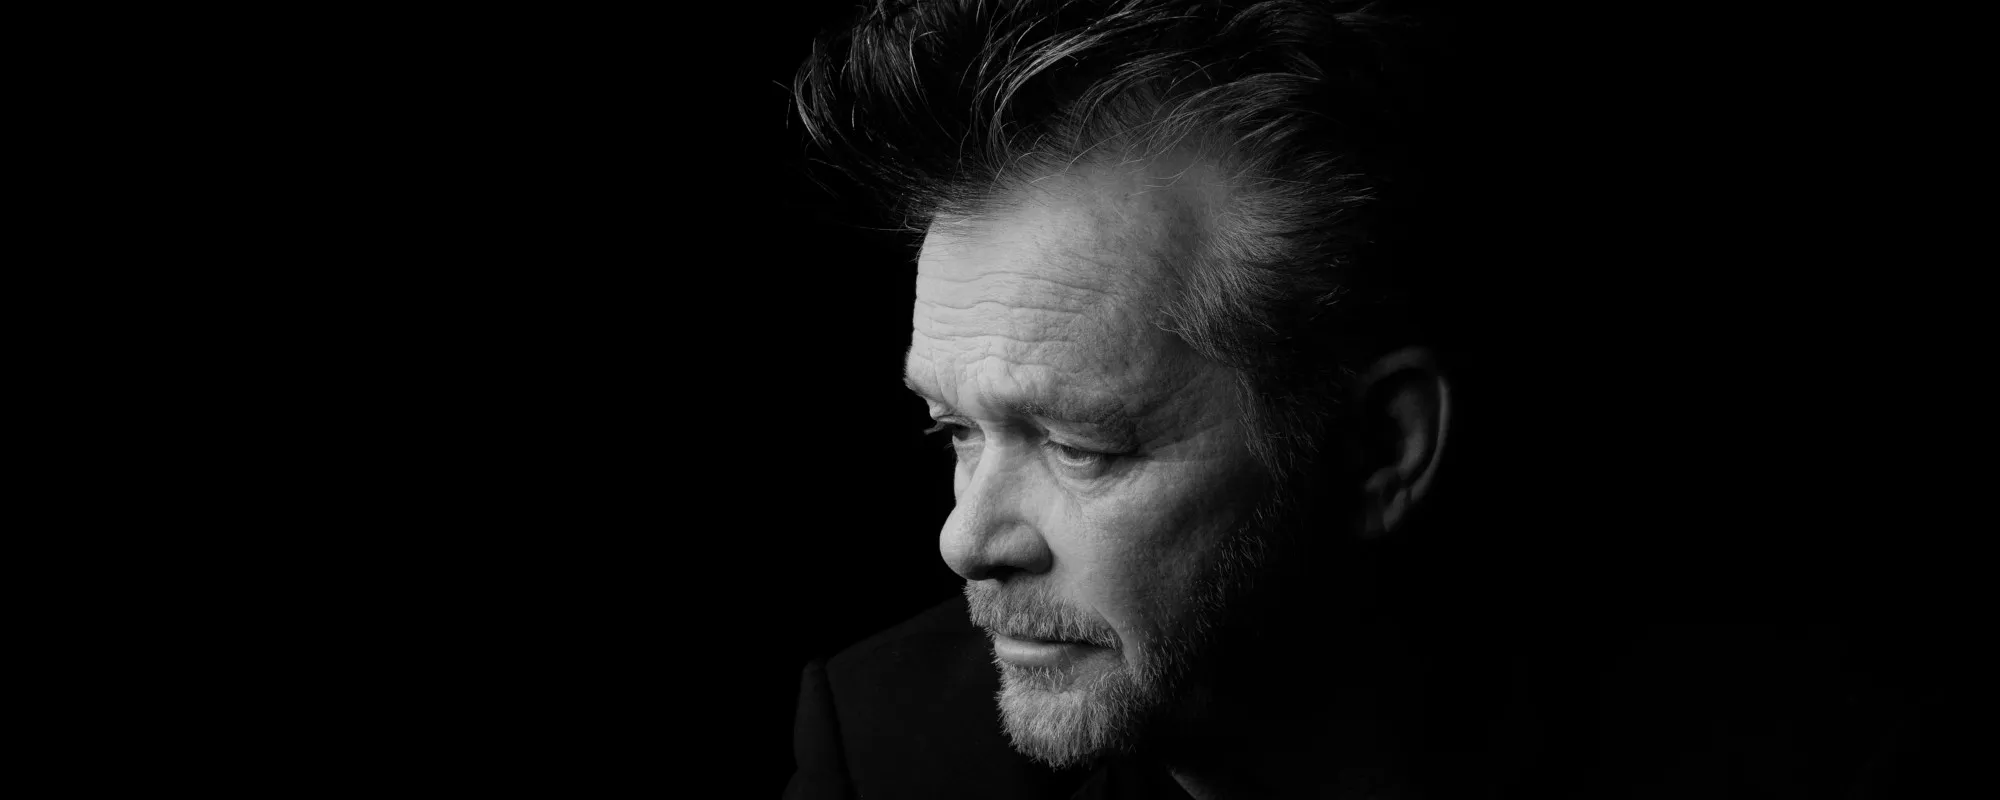 John Mellencamp and Bruce Springsteen Release Duet, “Wasted Days”